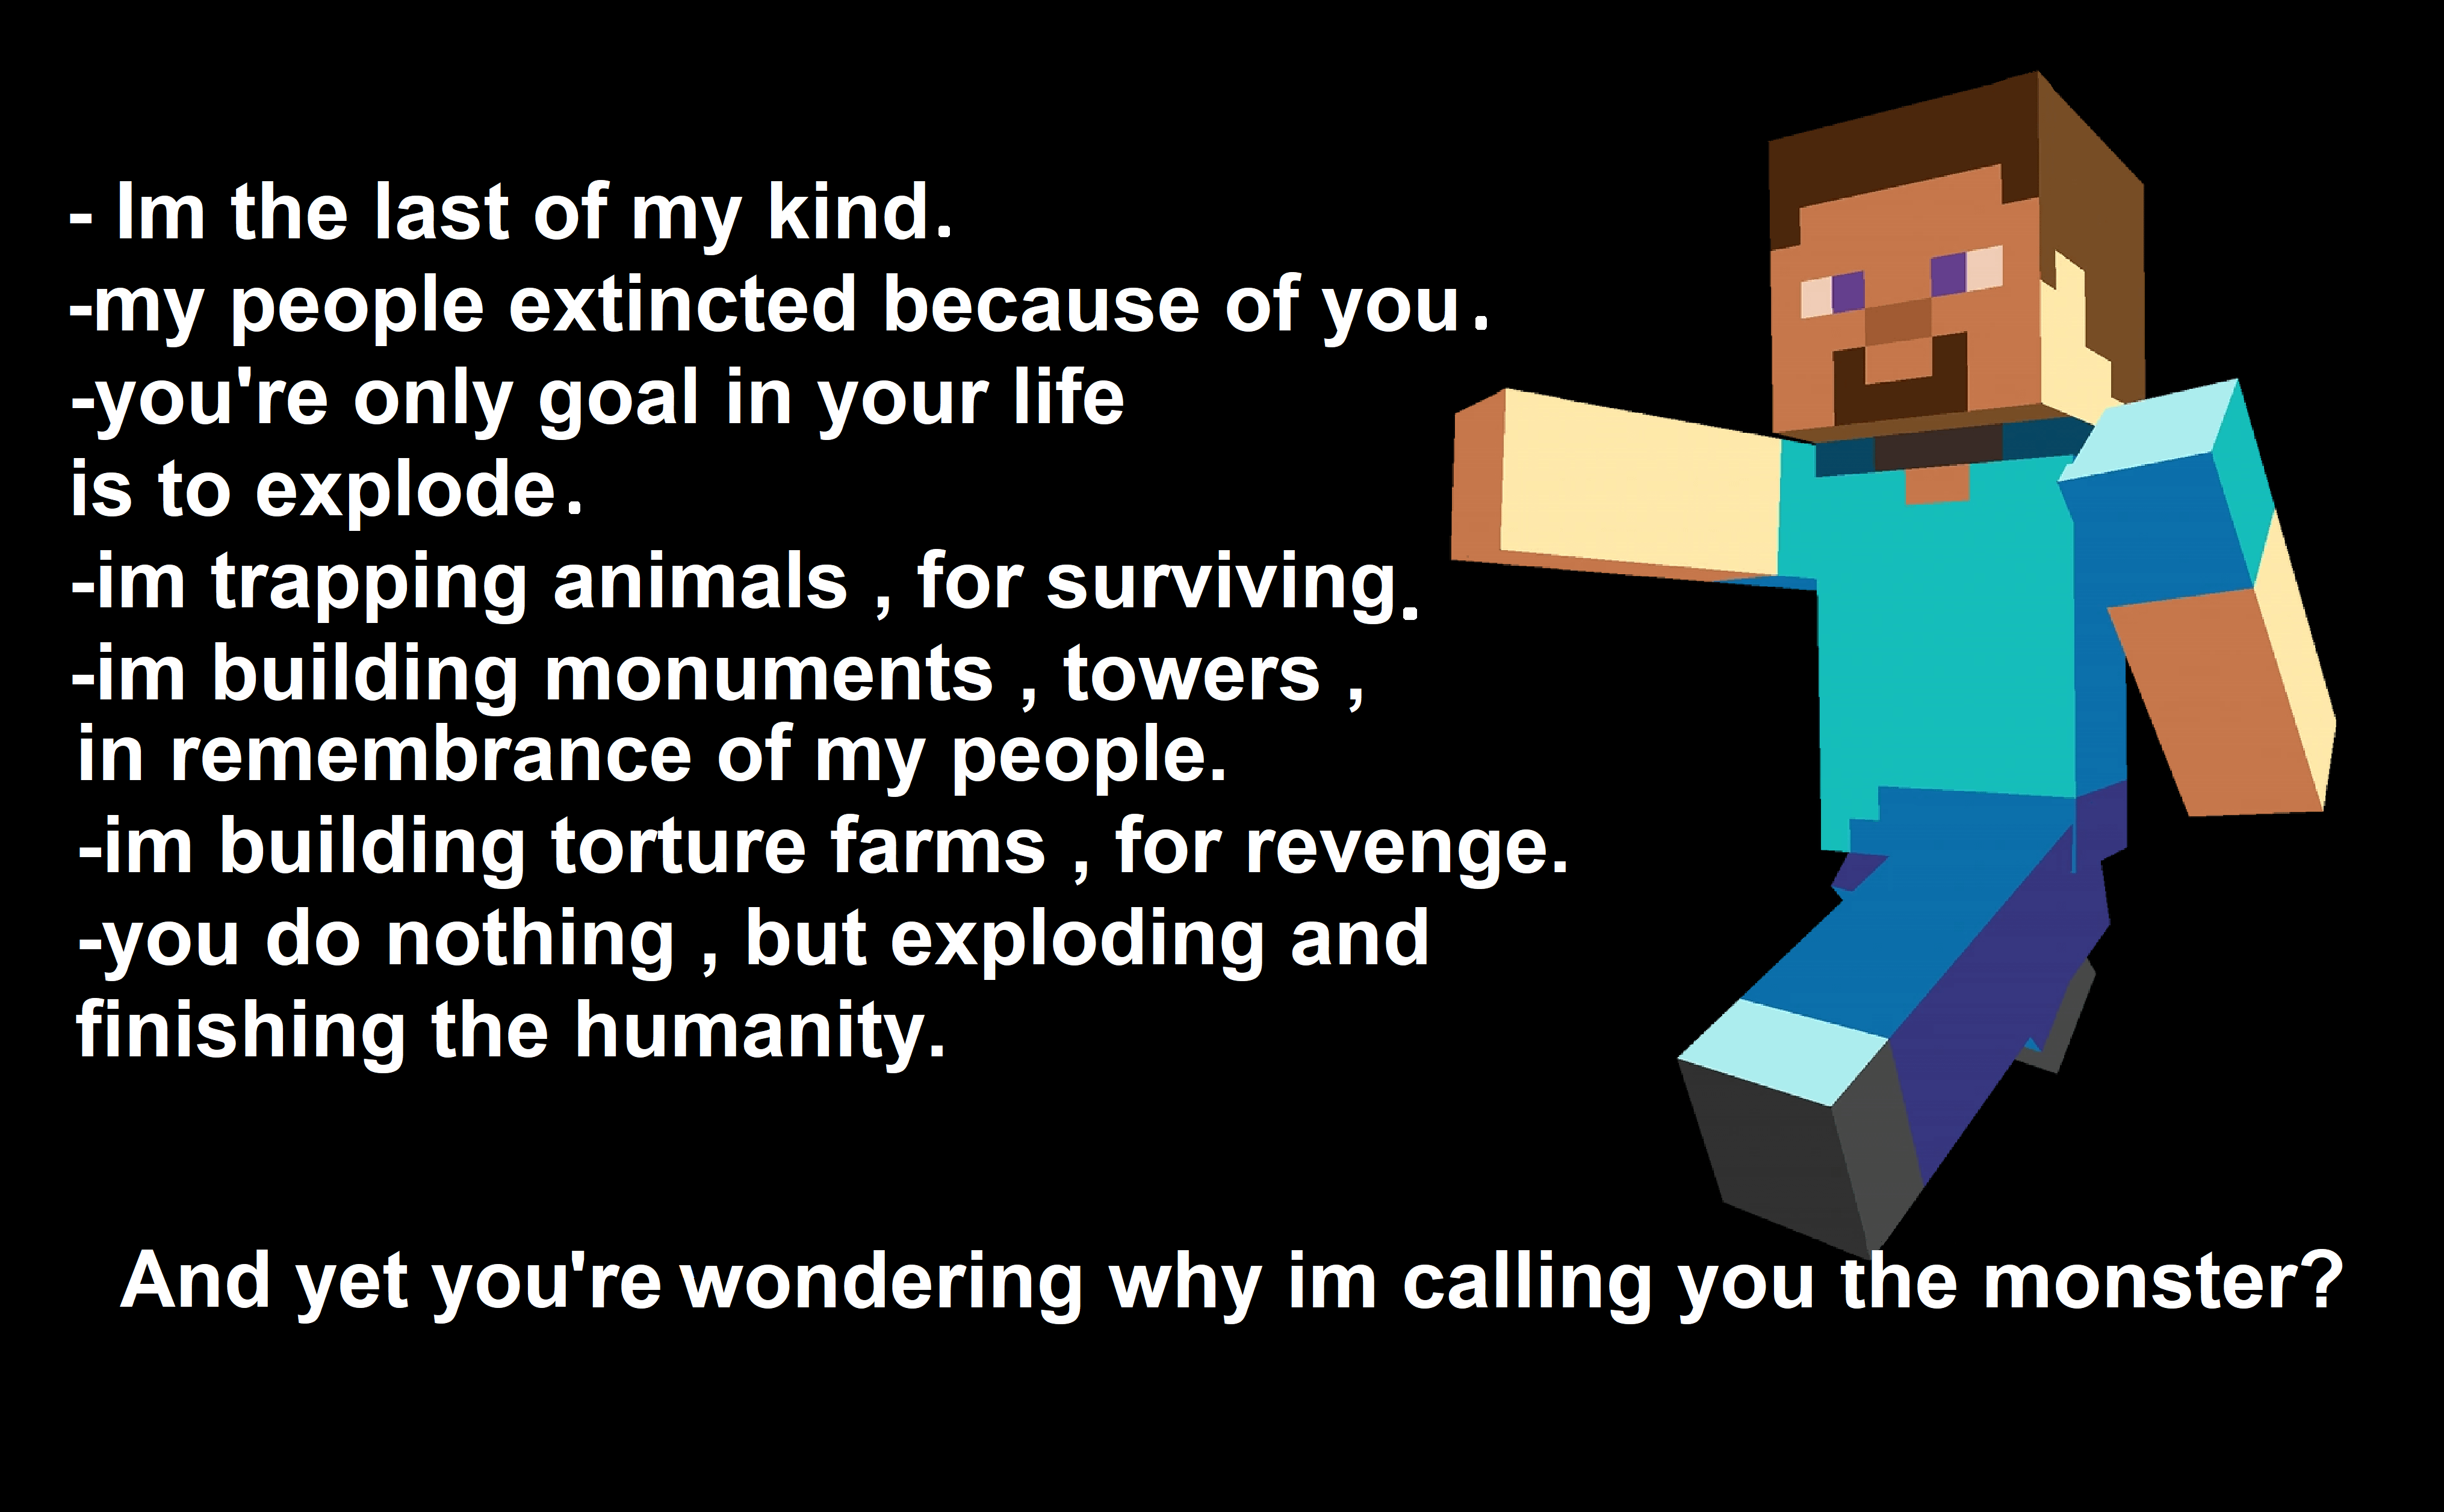 Minecraft Memes - "You're the monster now"